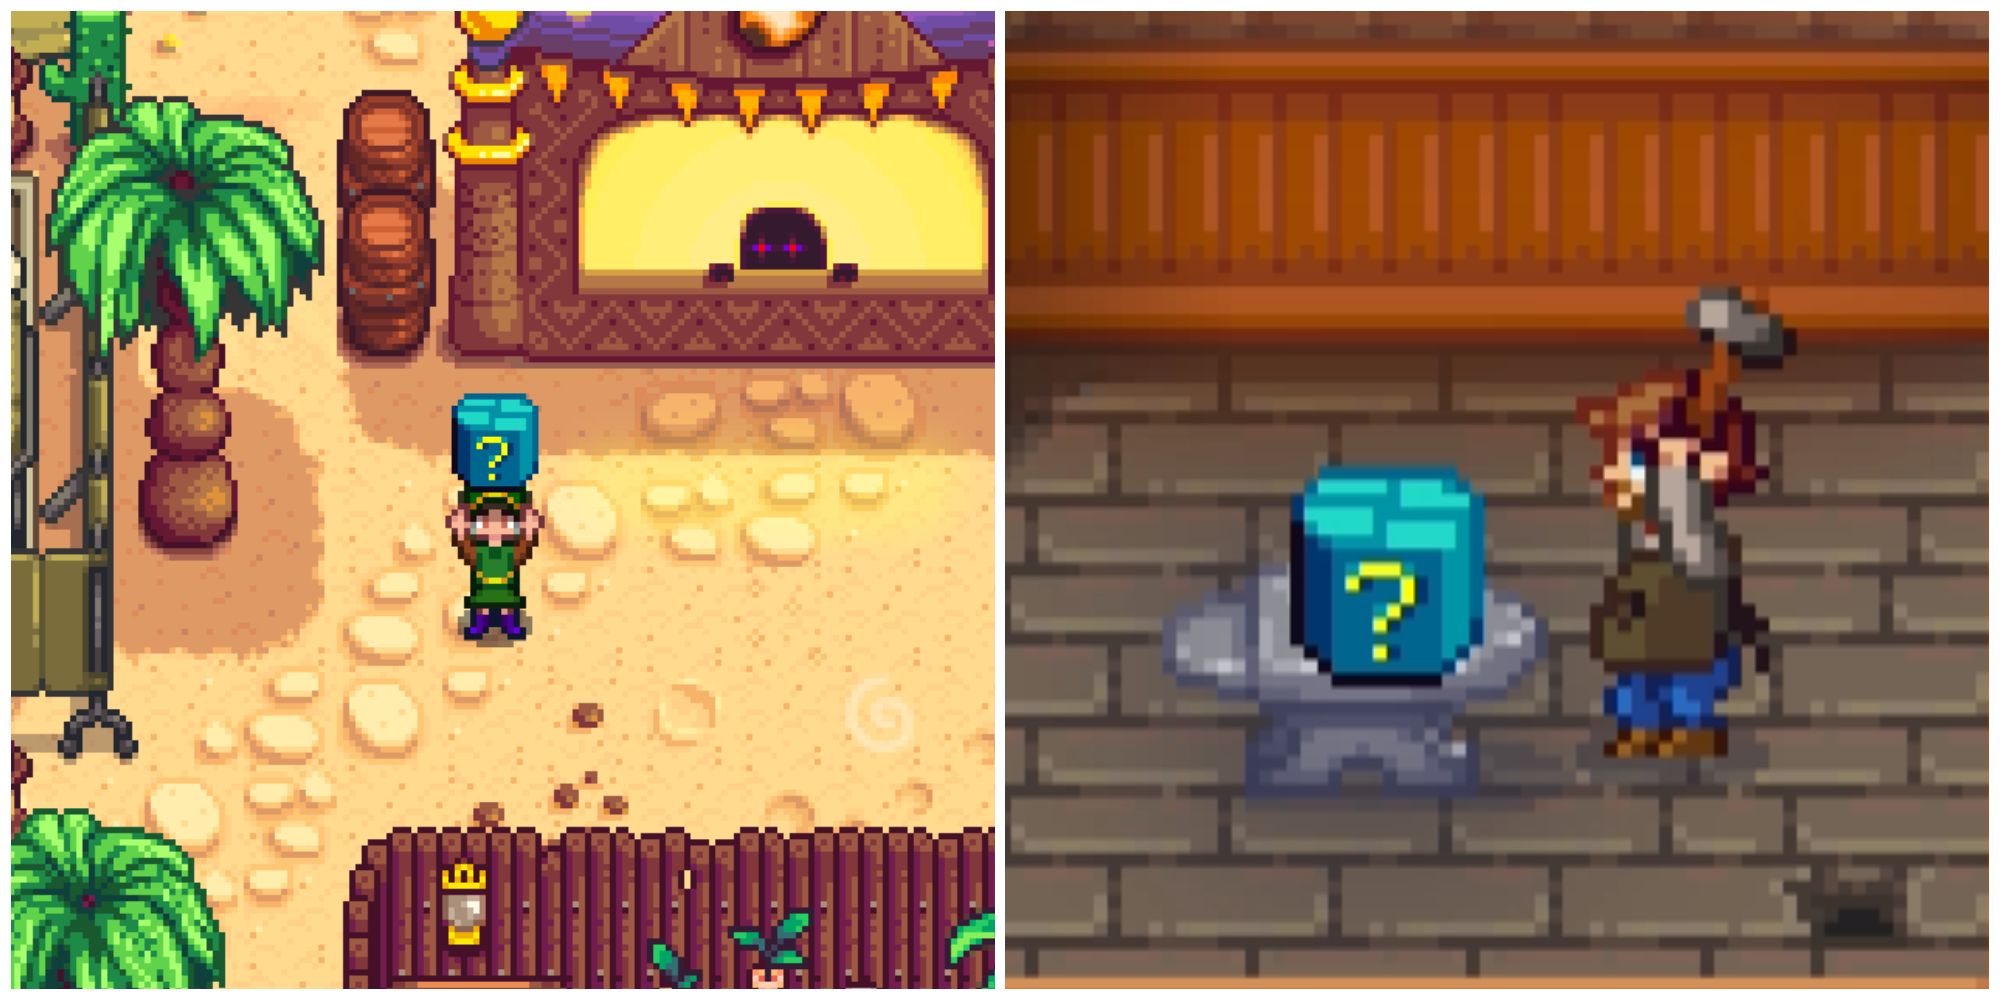 Split image of a character holding a Mystery Box and the blacksmith breaking open a Mystery Box in Stardew Valley